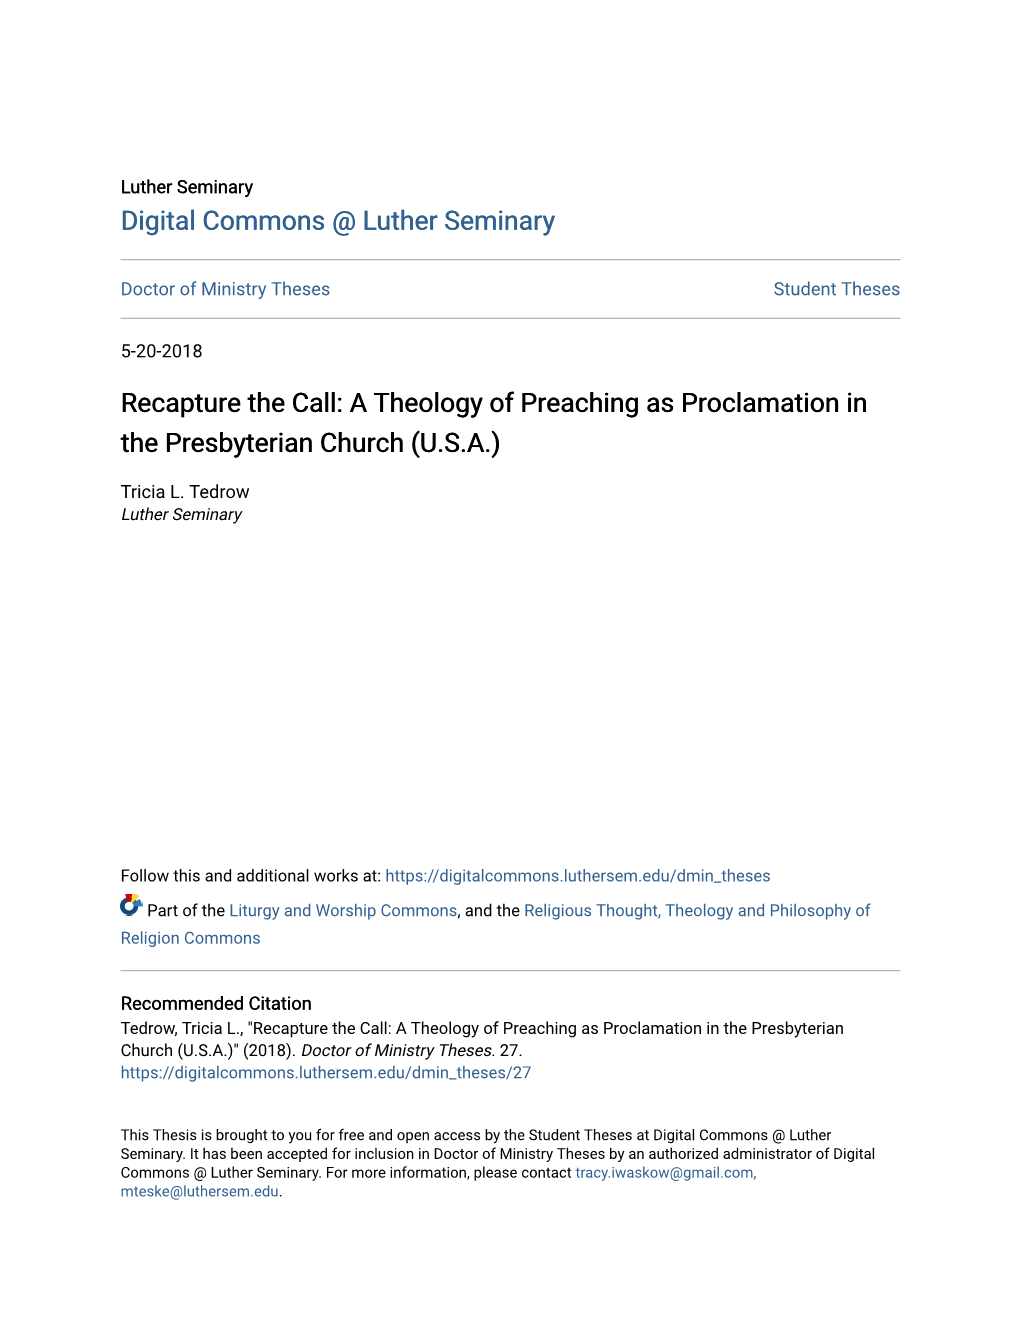 A Theology of Preaching As Proclamation in the Presbyterian Church (U.S.A.)